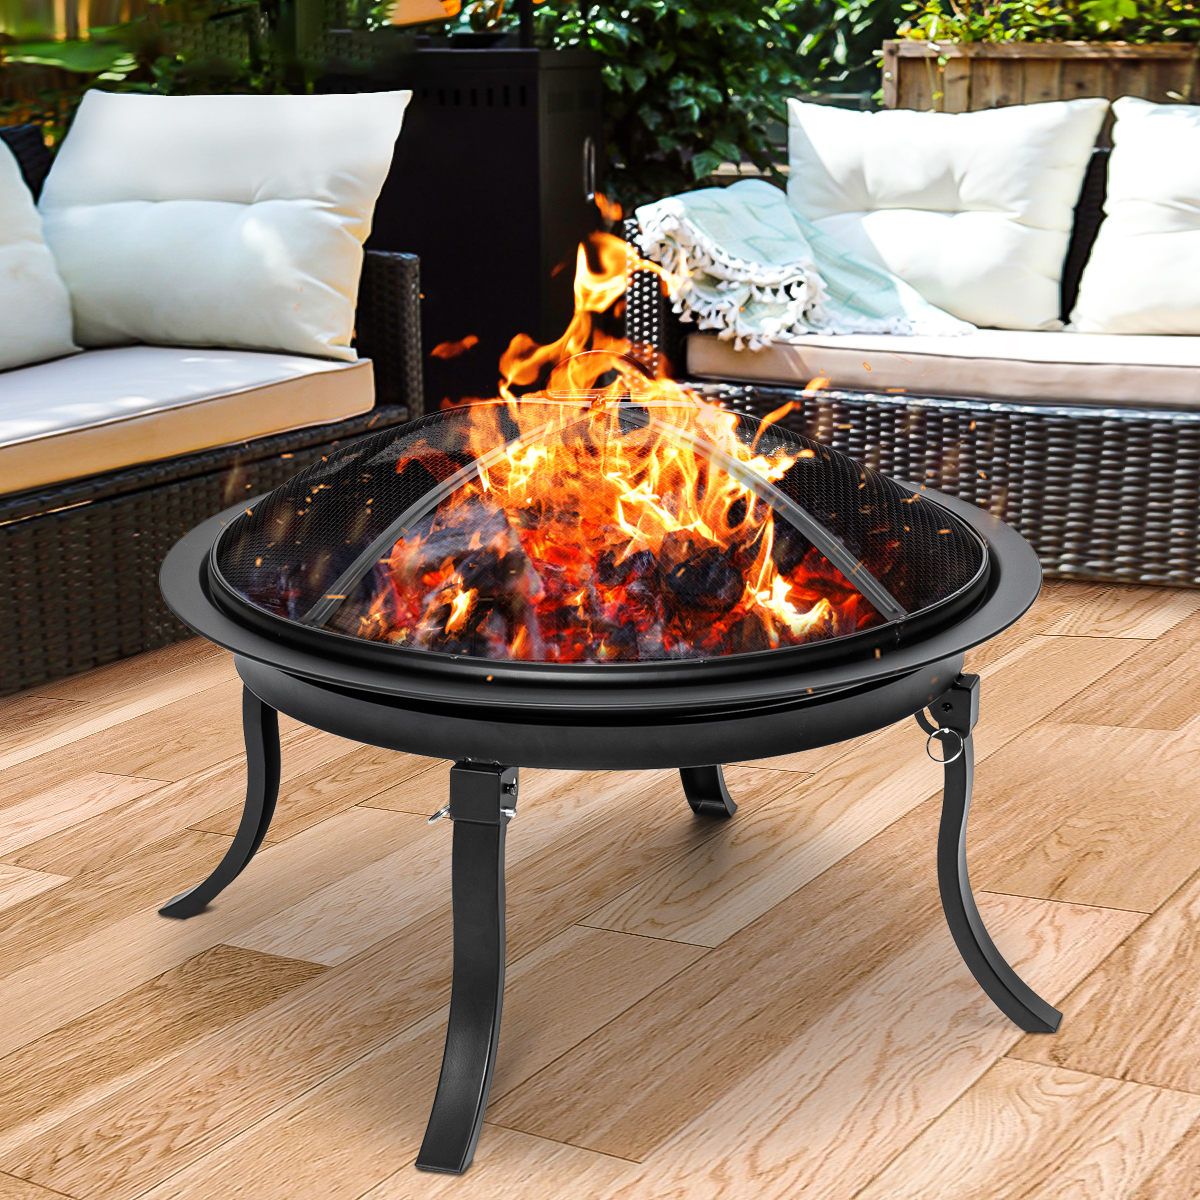 KingSo-24inch-Portable-Fire-Pits-Steel-Wood-Burning-Firepit--with-BBQ-Grill-Fire-Bowl-Poker-1886879-11